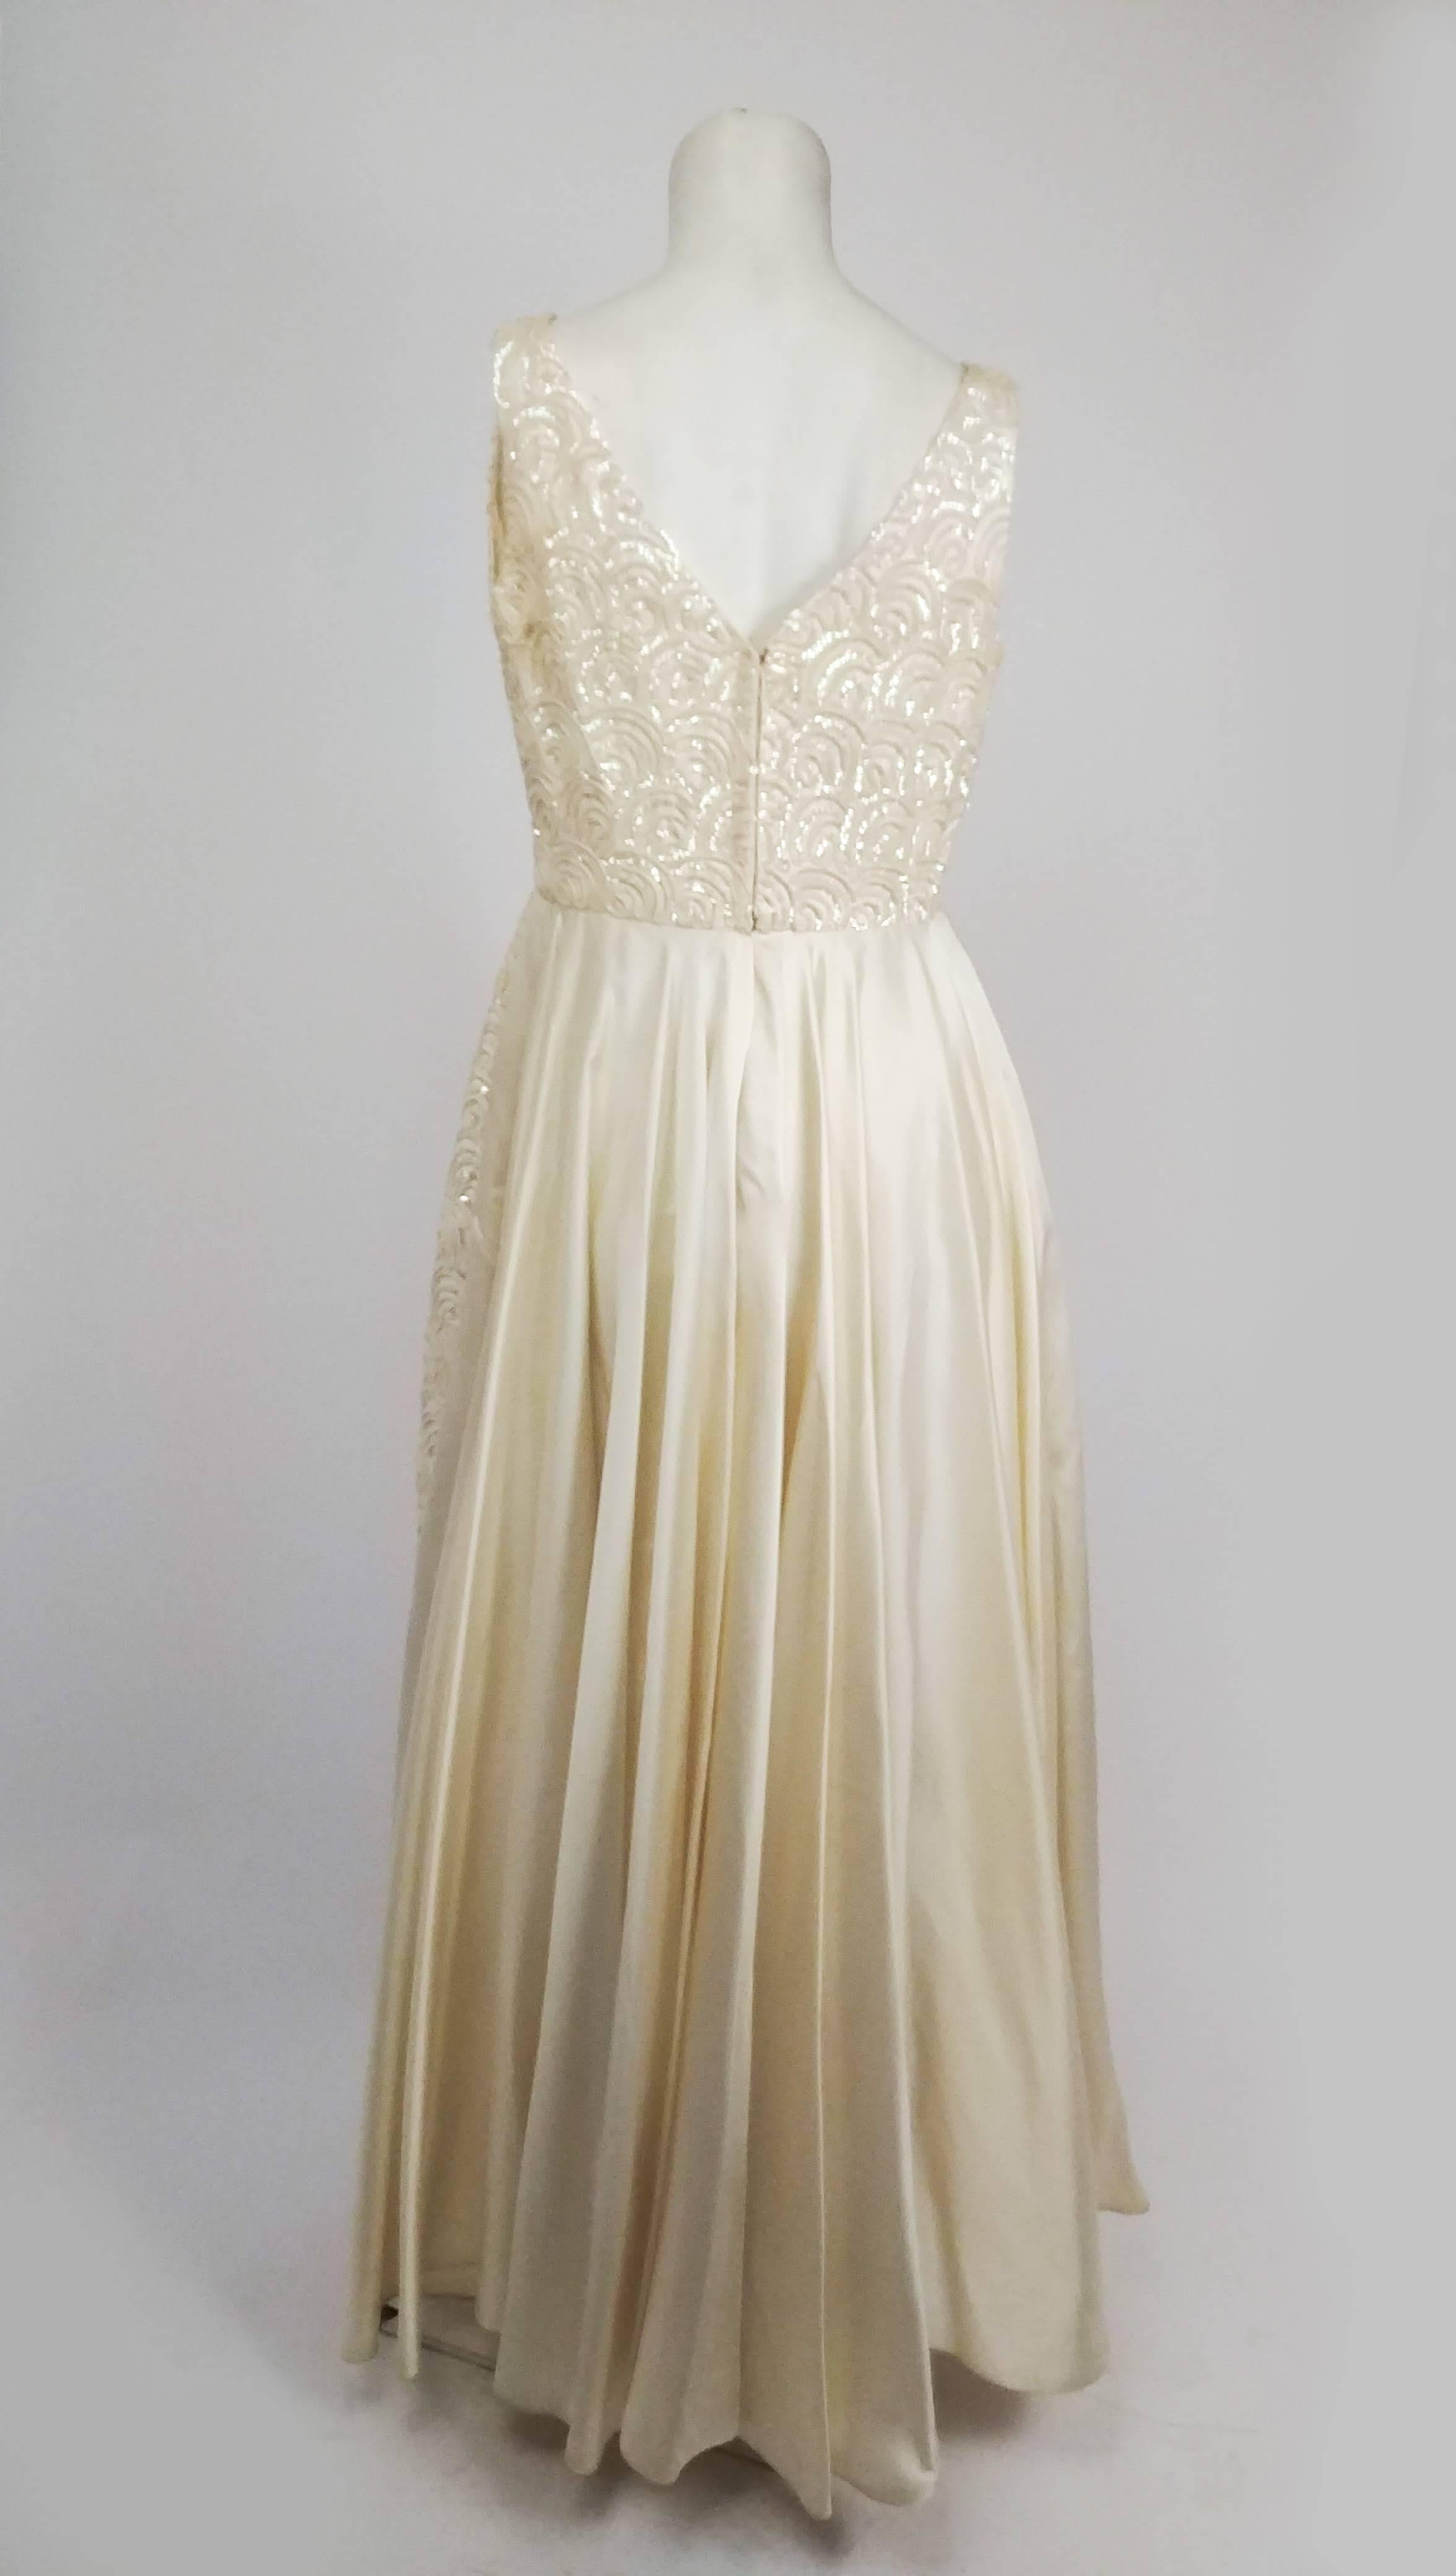 1960s White Sequin Long Gown. Iridescent sequins in a wave pattern sewn over the entirety of this dress. Fitted at waist, flared skirt. V neckline. Zips up back. 